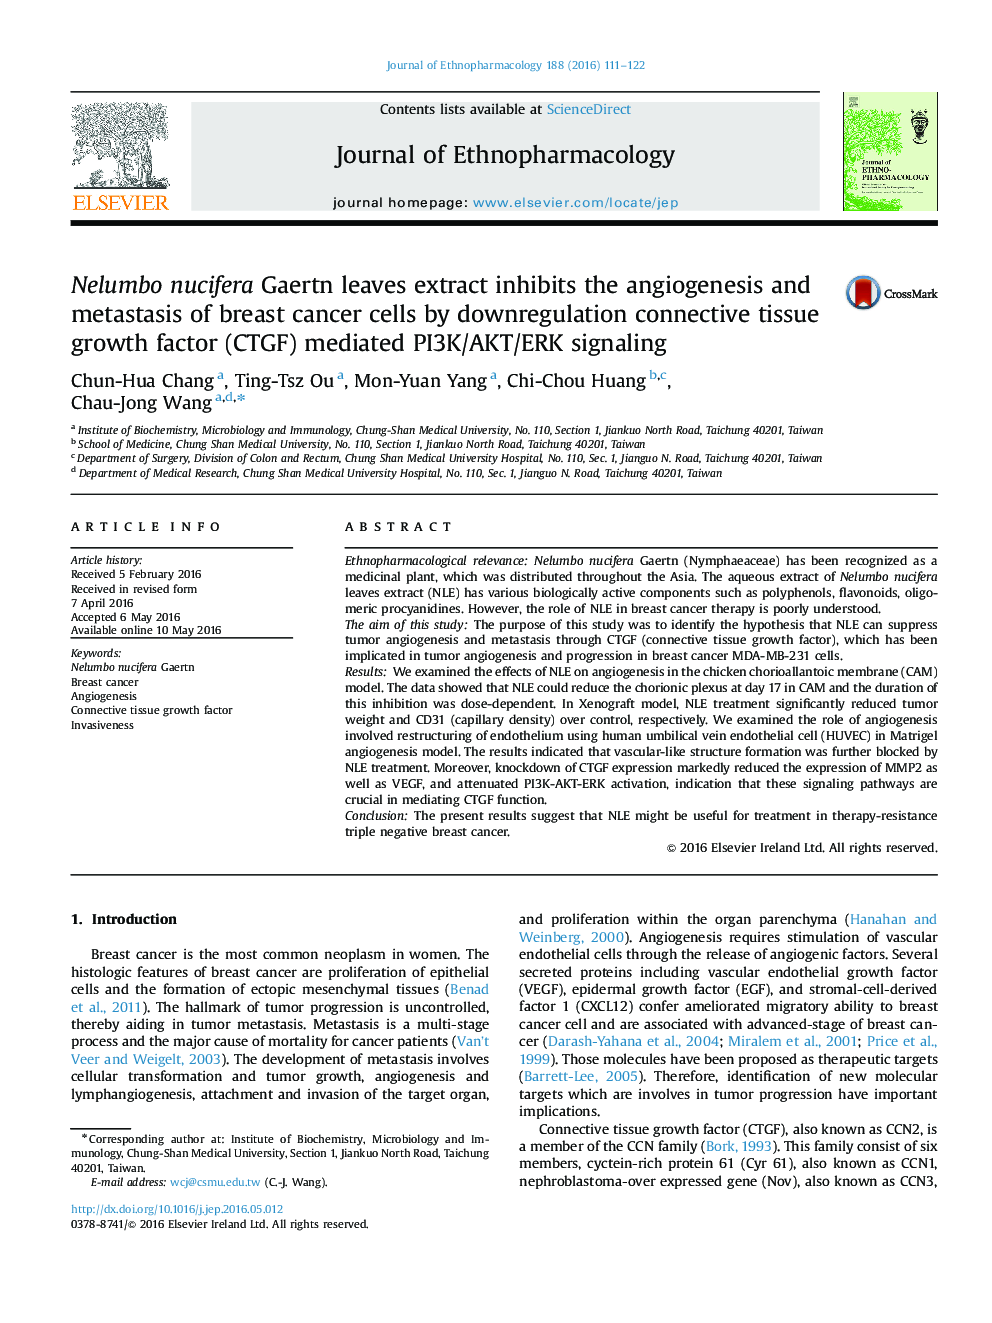 Nelumbo nucifera Gaertn leaves extract inhibits the angiogenesis and metastasis of breast cancer cells by downregulation connective tissue growth factor (CTGF) mediated PI3K/AKT/ERK signaling